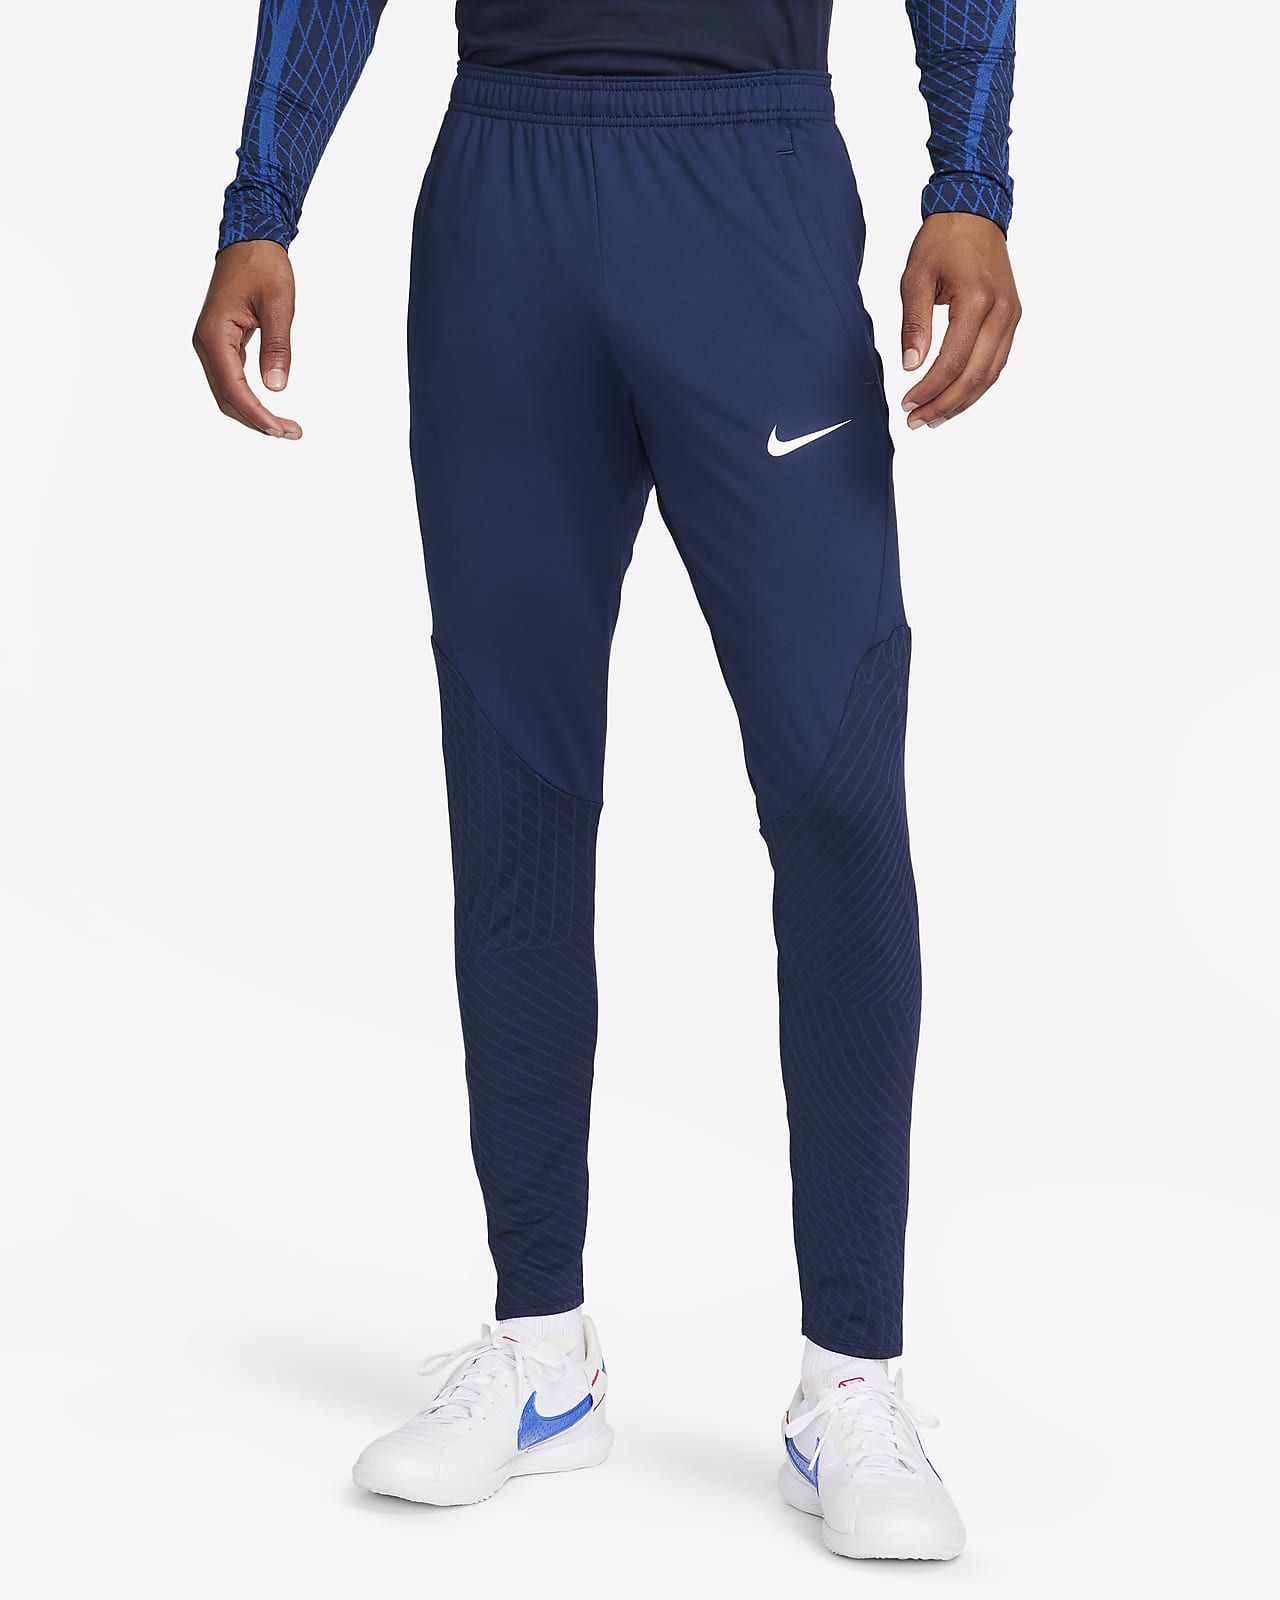 Nike Mid Waist Running Tight Sports Training Gym Pants/Trousers/Joggers  Black 'Multi-Color' - DD6836-010 | Solesense